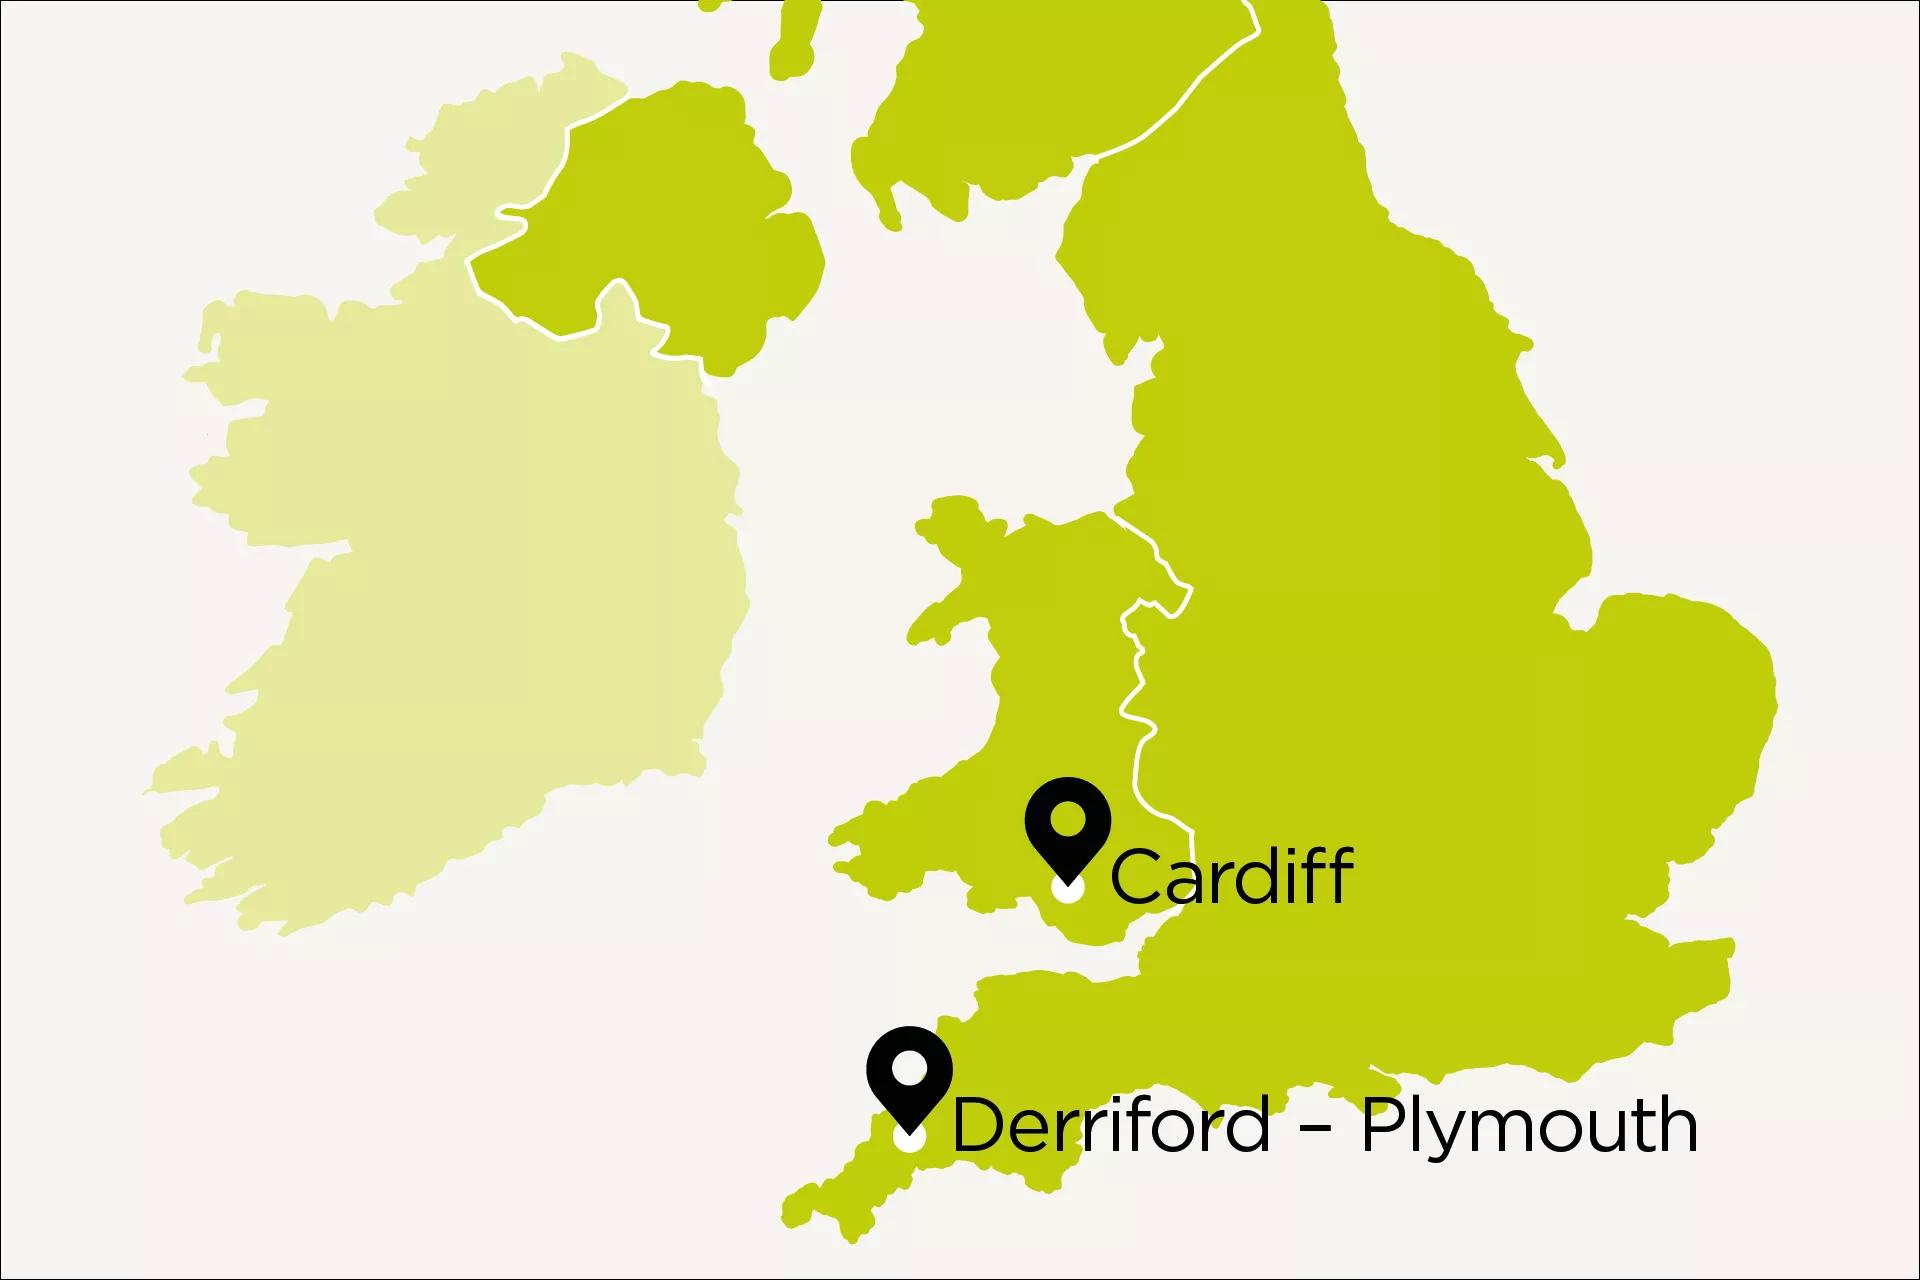 Map of UK with Cardiff and Derriford-Plymouth pinpoints